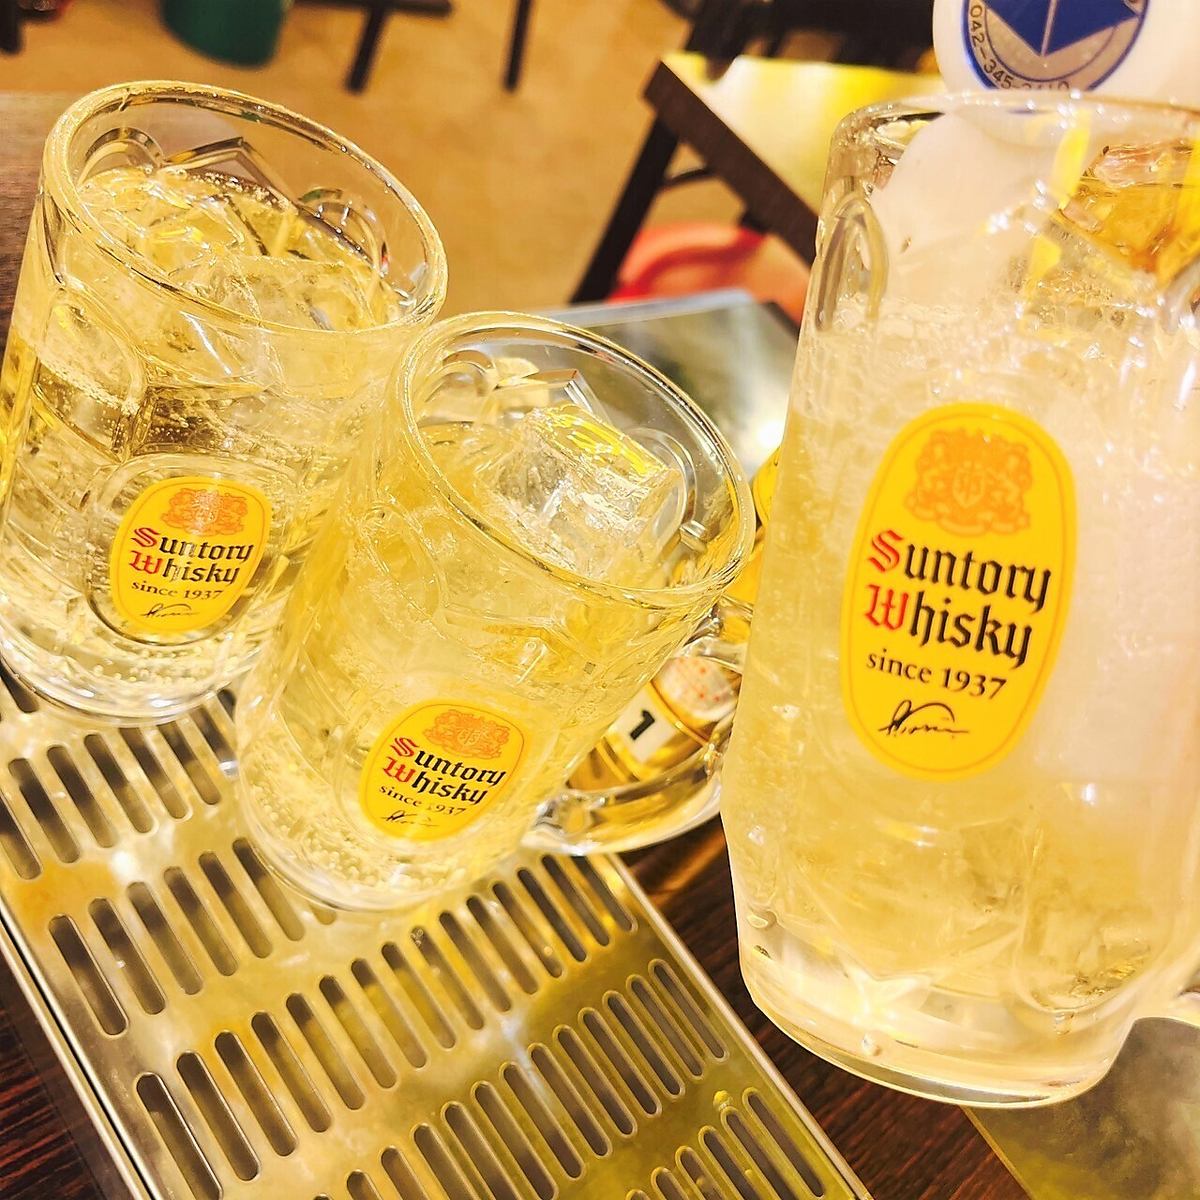 The all-you-can-drink corner highball is 0 yen for 90 minutes!